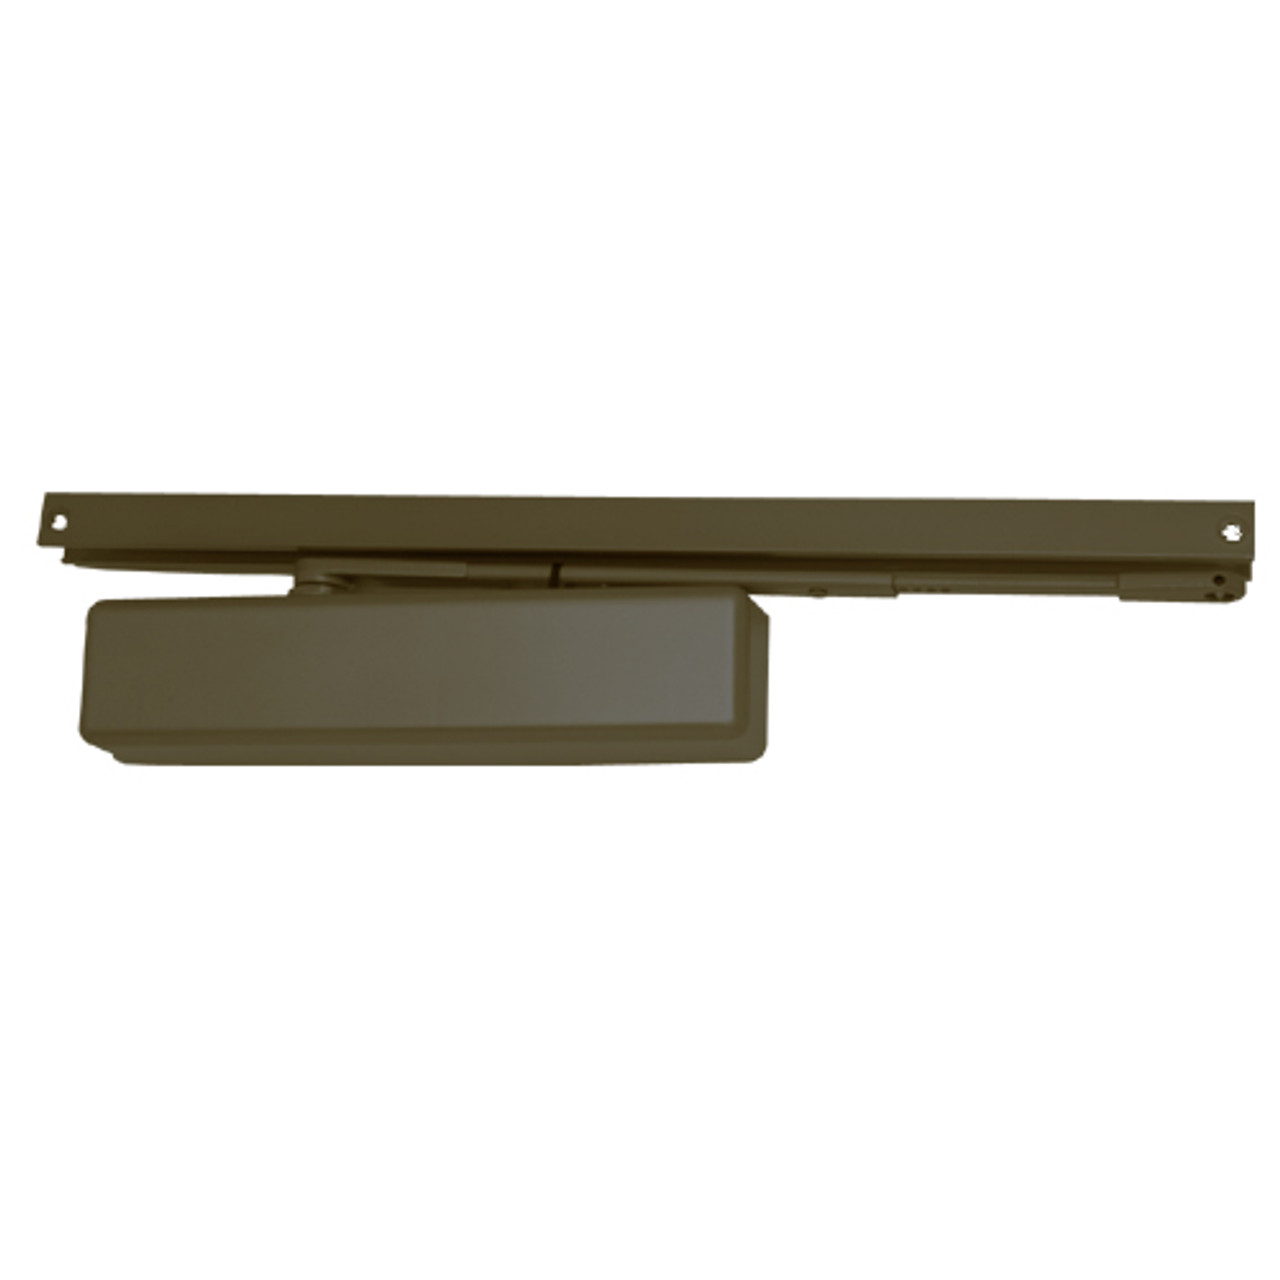 1460T-BUMPER-US10B-FC LCN Surface Mount Door Closer with Bumper Arm in Oil Rubbed Bronze Finish